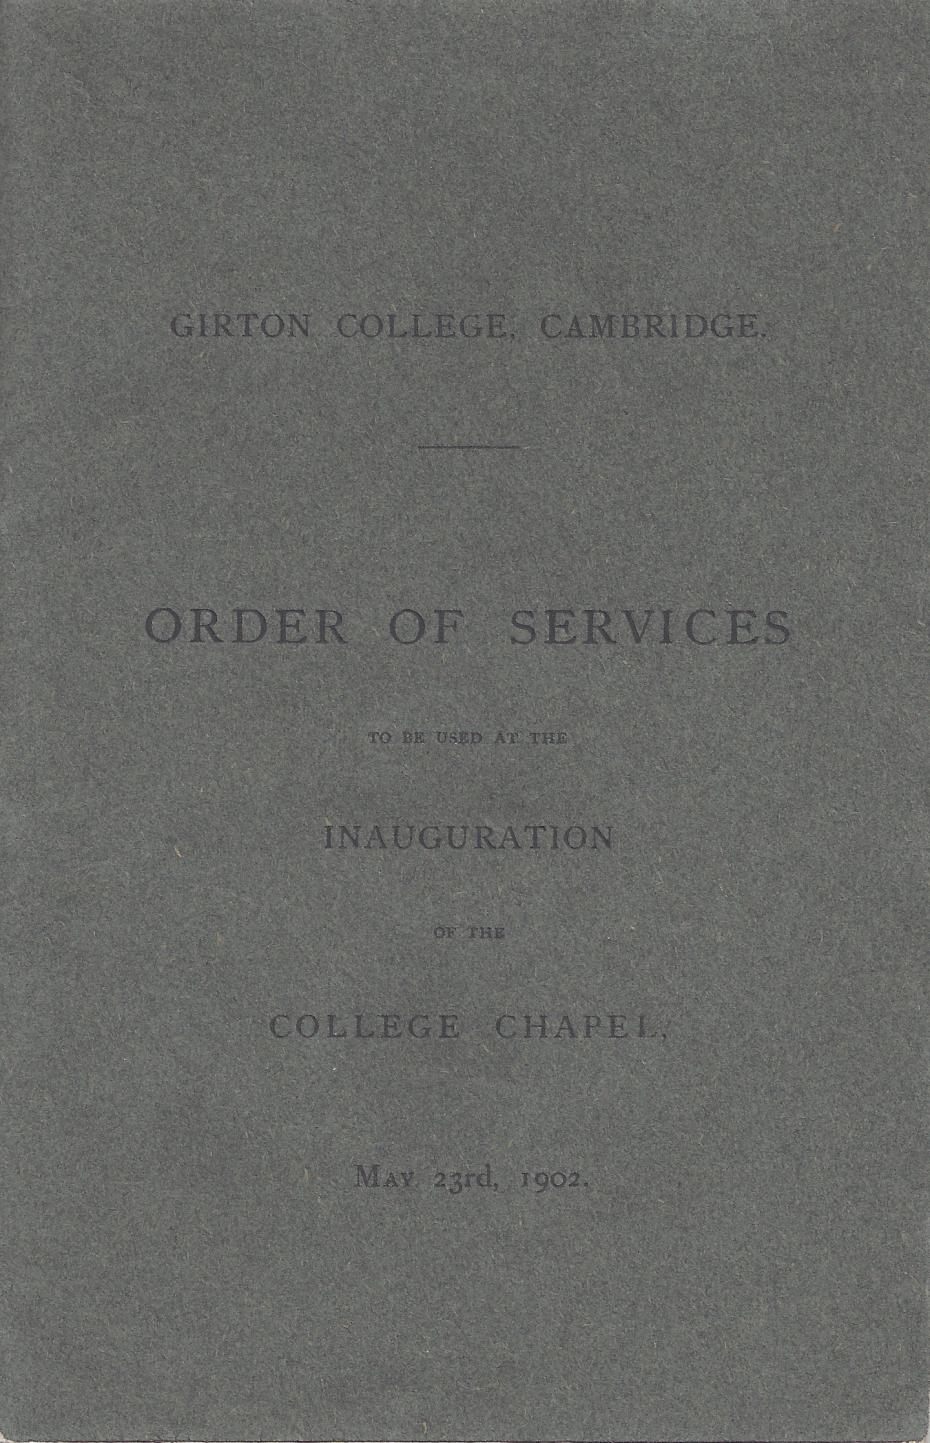 ‘Order of Services to be used at the inauguration of the College Chapel’, 23 May 1902 (archive reference: GCAR 6/4/3).